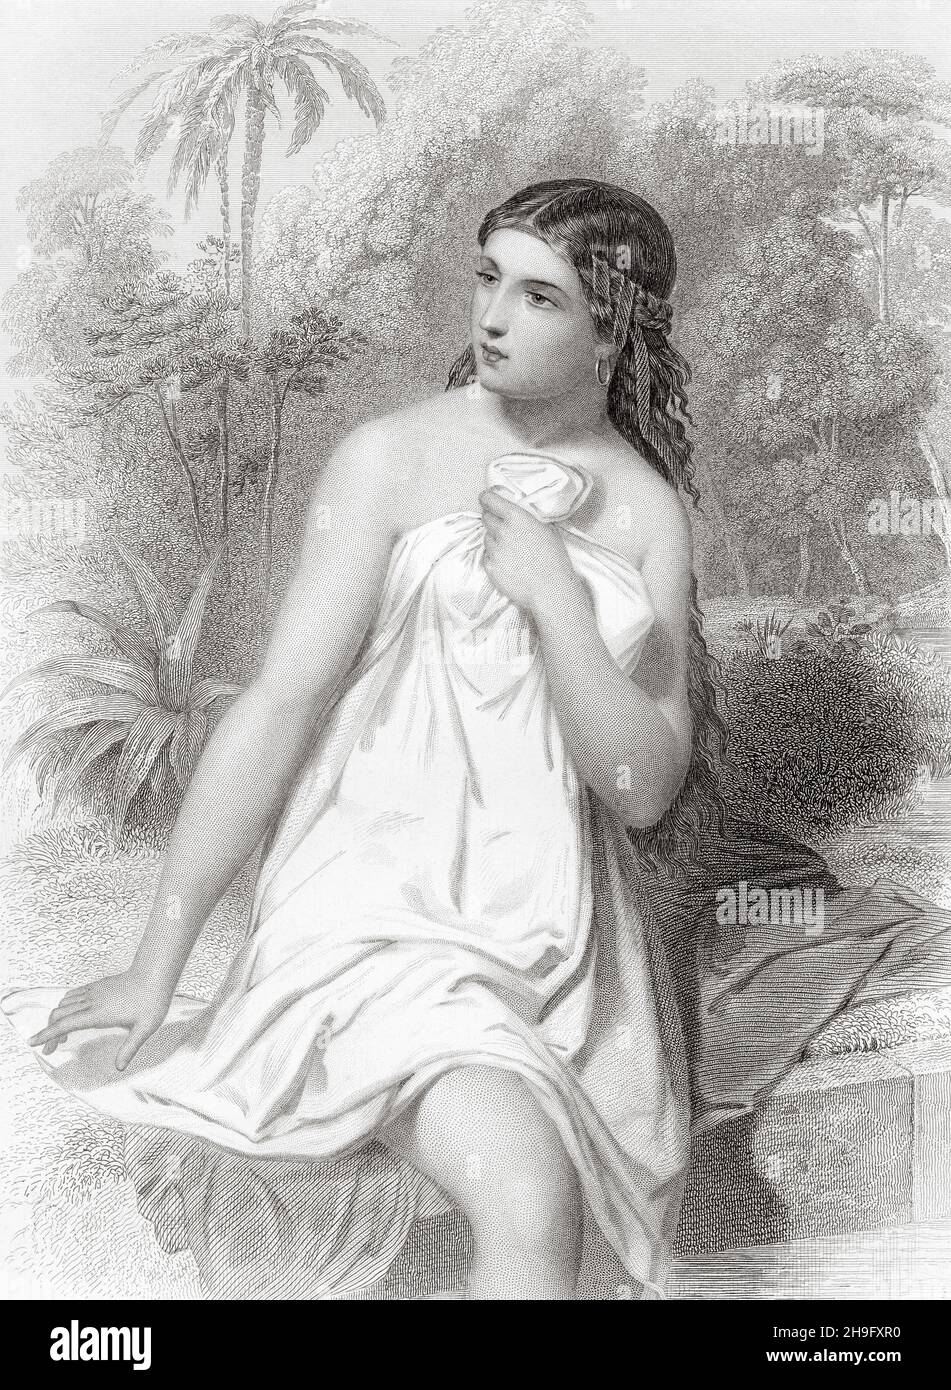 Susana was a woman who appears in the Book of Daniel, daughter of Hilkiah and wife of Joaquin, a wealthy and influential Jew in the Babylonian Exile. Two elderly judges are passionate about Susana and agree to surprise her alone and abuse her. Old 19th century engraved illustration from Mugeres de la Biblia by Joaquin Roca y Cornet 1862 Stock Photo